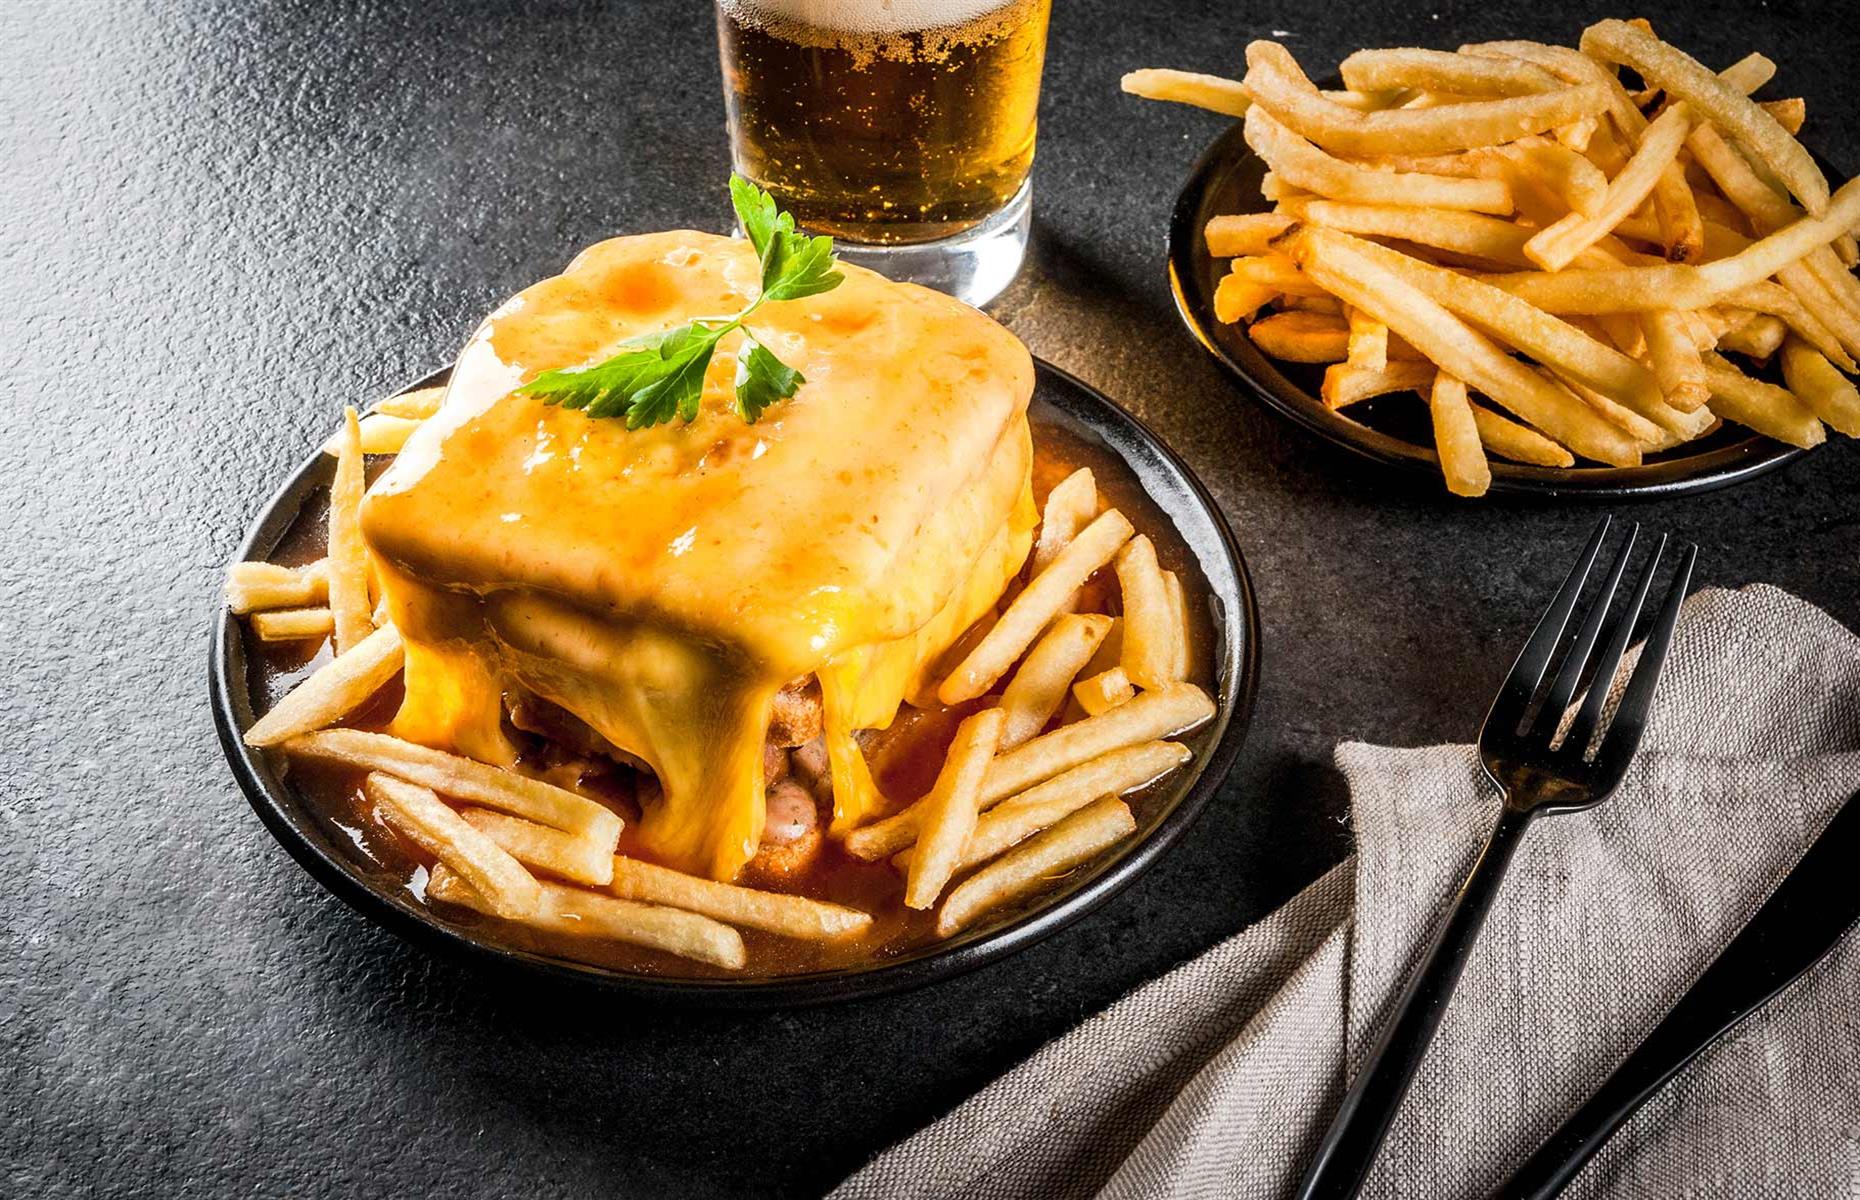 <p>The francesinha is a hearty and indulgent sandwich that has evolved into a national gastronomic treasure. Its history dates back to the 1960s when a French-inspired croque-monsieur met Portuguese ingredients, resulting in the birth of this dish. Translated as 'little Frenchie' in English, the francesinha has become a culinary sensation not only in Porto but throughout Portugal. Its popularity has transcended regional boundaries, earning it a place on menus across the country as a beloved comfort food.</p>